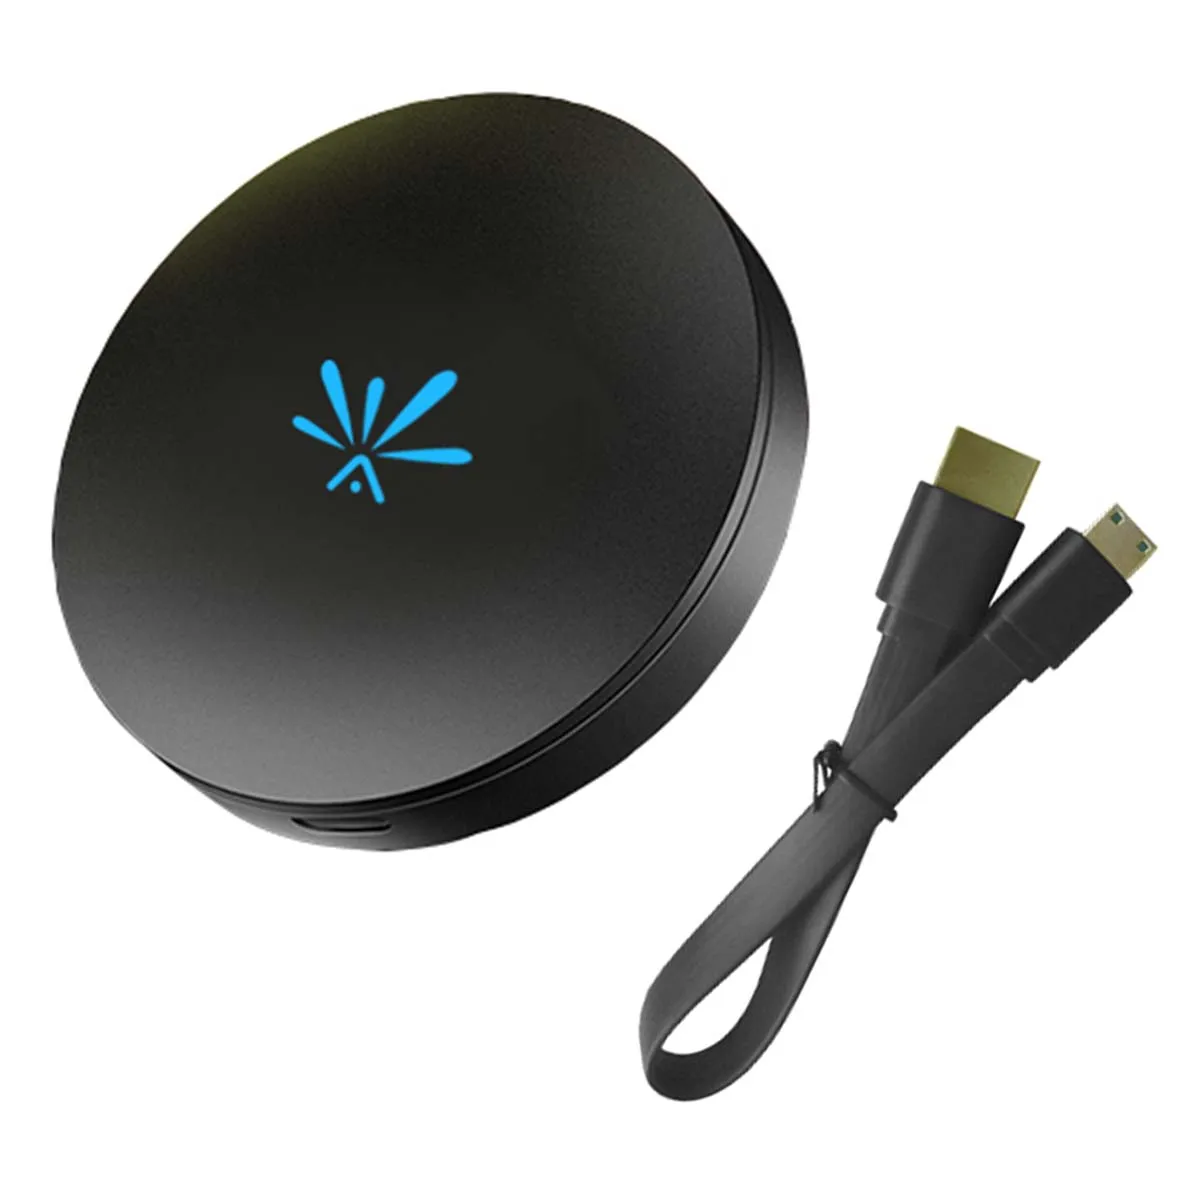 

G6 TV Stick 2.4GHz Video WiFi Display HD Screen Mirroring TV Wireless Dongle Receiver For Chromecast 2